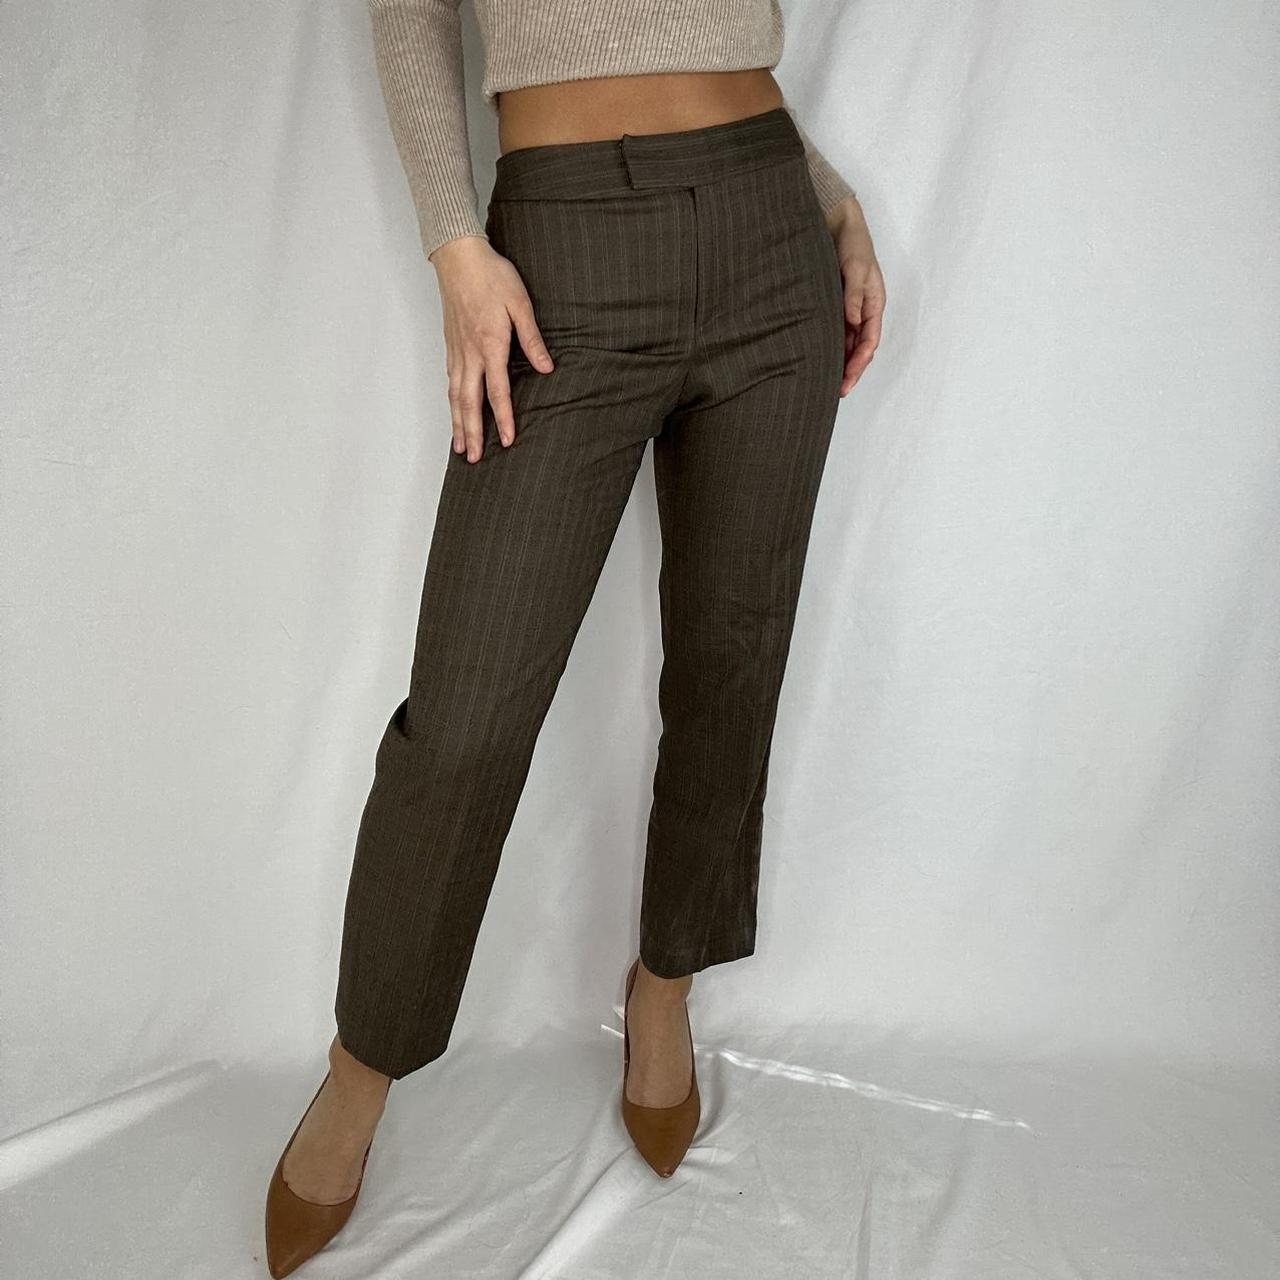 Talbots petites brown pants 💗 ️‍🔥ANY 5 ITEMS FOR $85... - Depop